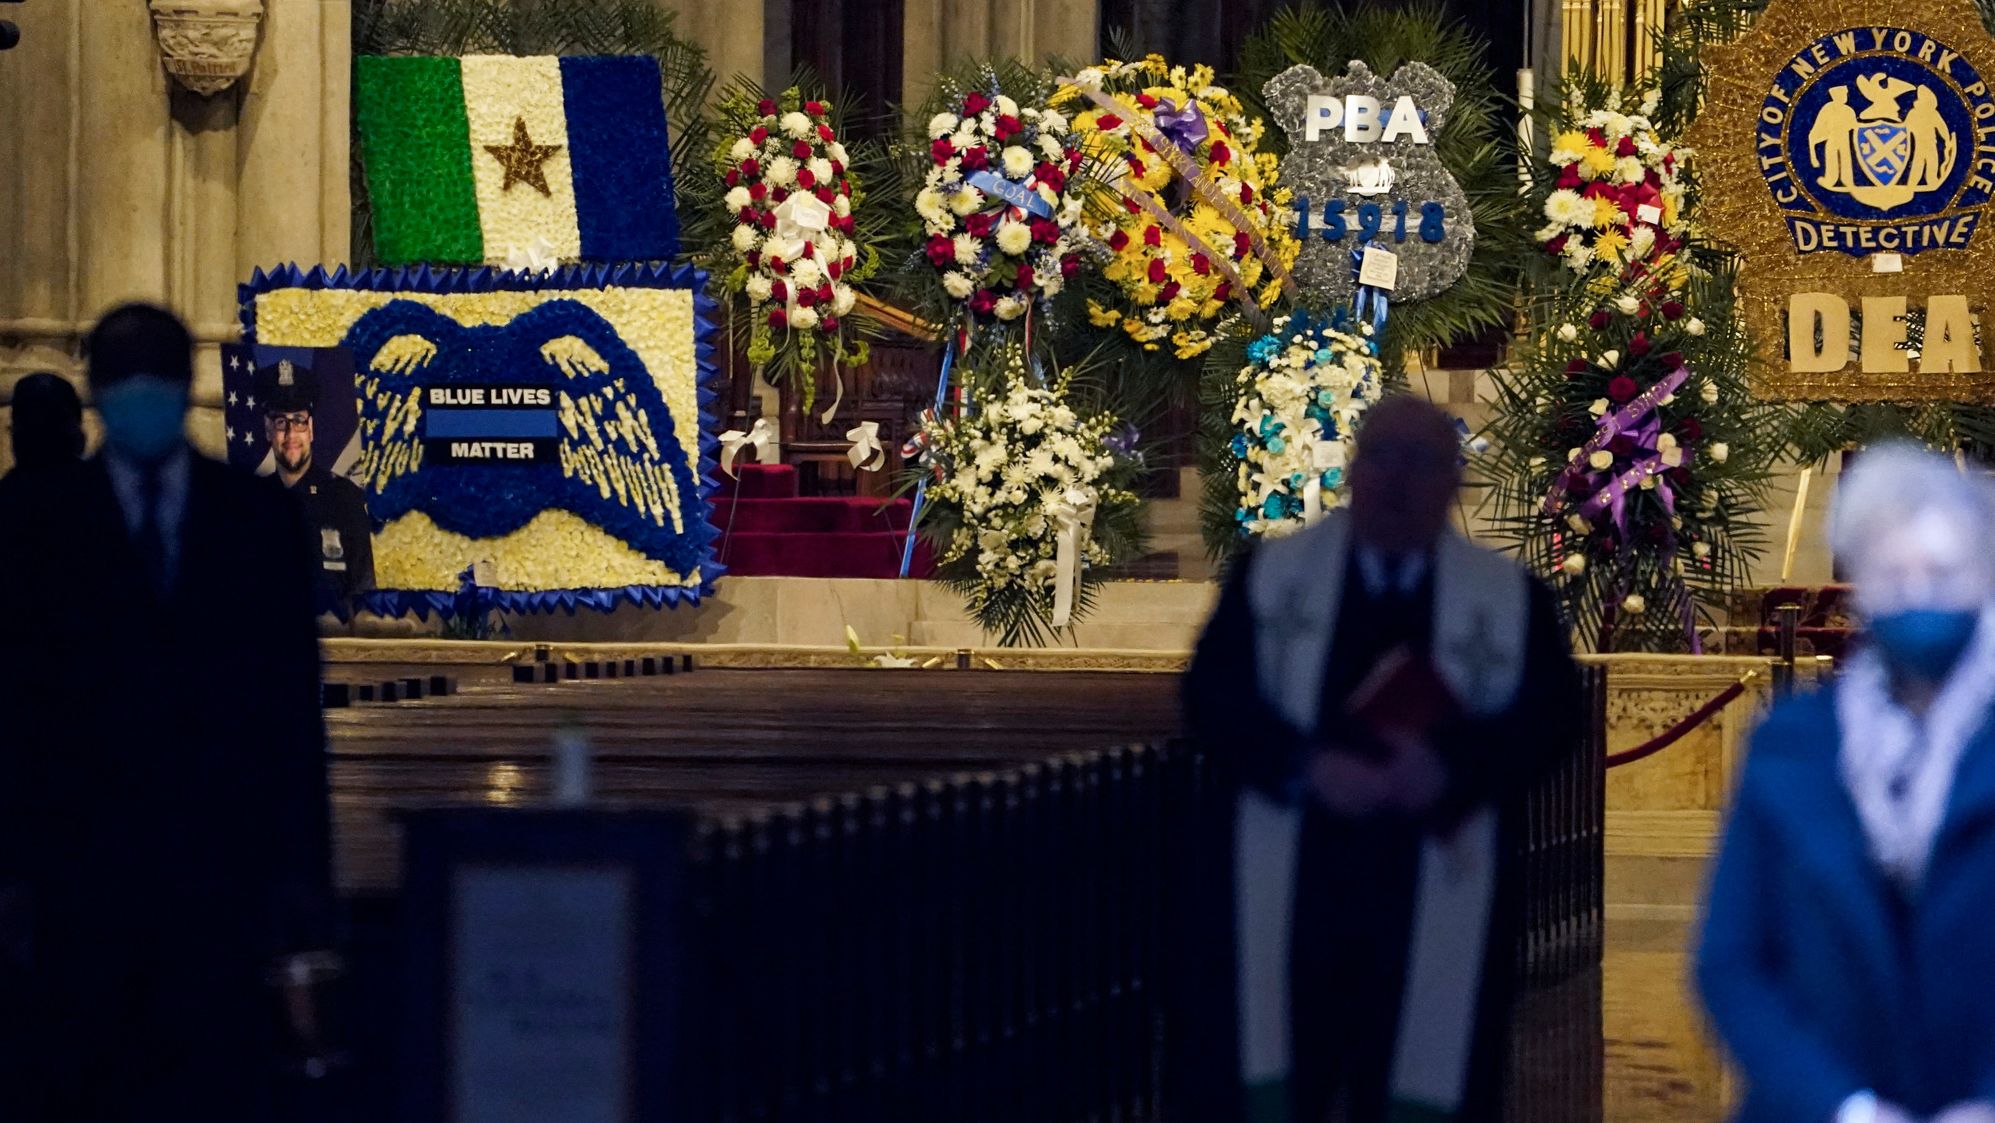 Flowers are displayed for Mora at St. Patrick's Cathedral.